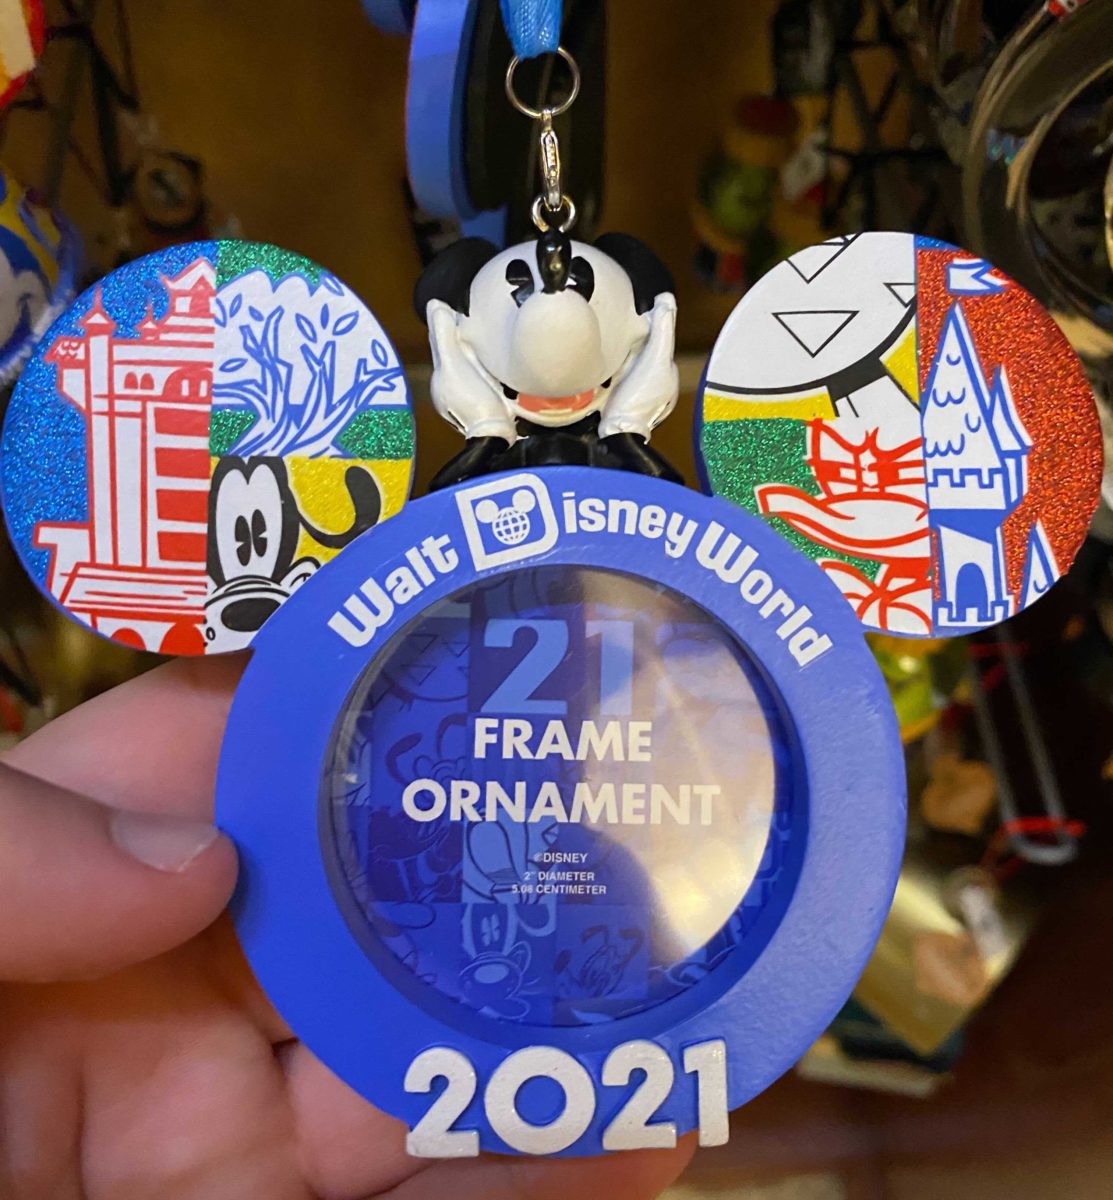 PHOTOS Even More New 2021 Christmas Ornaments Arrive at